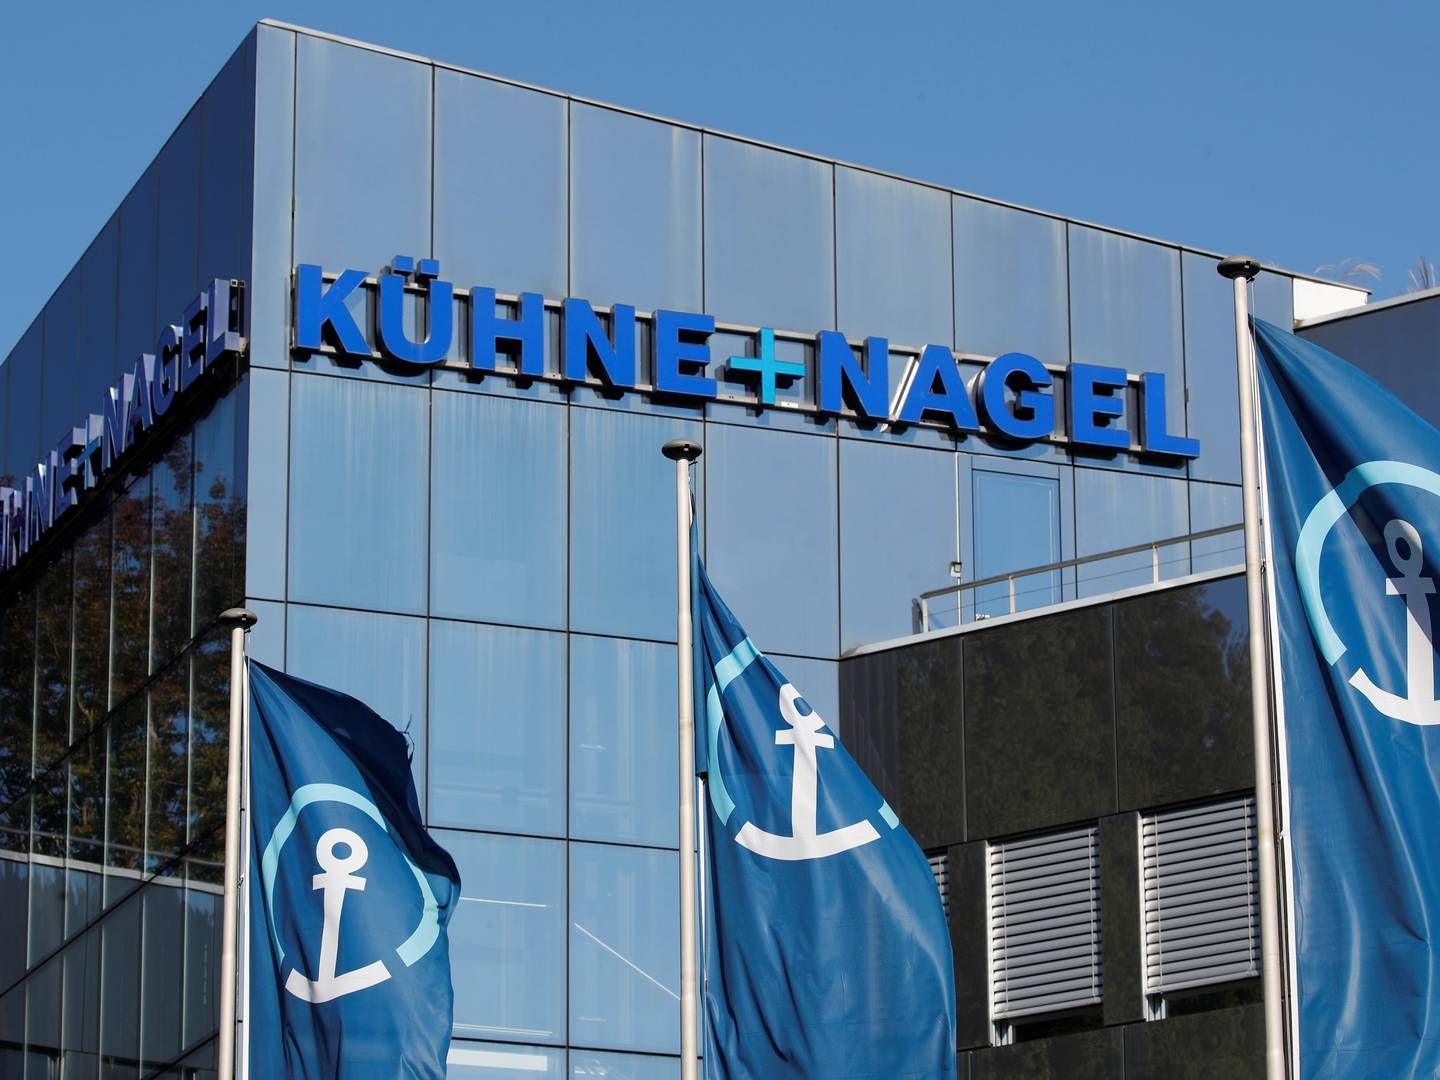 Kuehne+Nagel has approximately 400,000 customers worldwide and is spread across 100 countries with 1300 locations. | Foto: Arnd Wiegmann/Reuters/Ritzau Scanpix